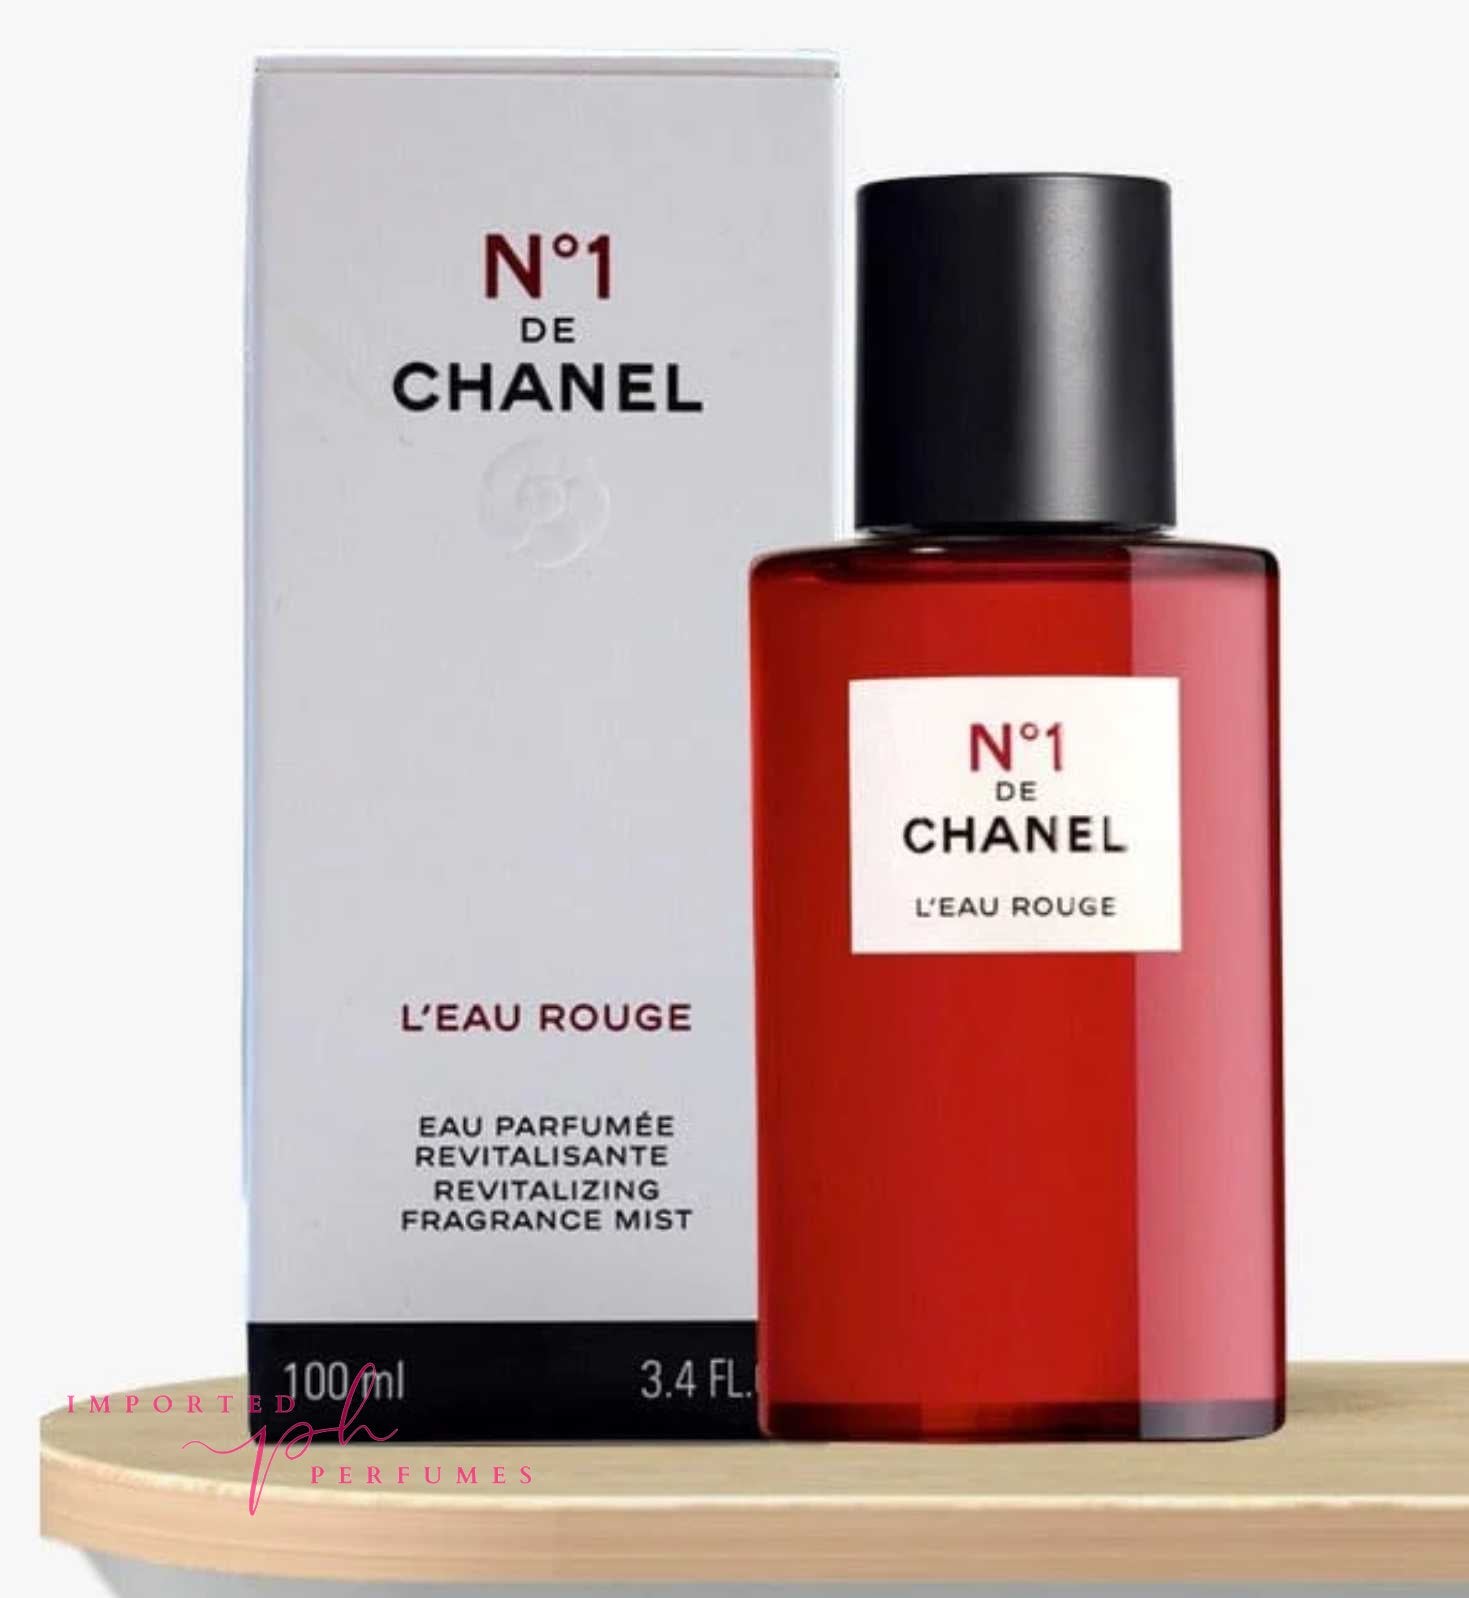 Buy Authentic Chanel Gift Set 30ml 3 in 1 Set For Men & Women, Discount  Prices